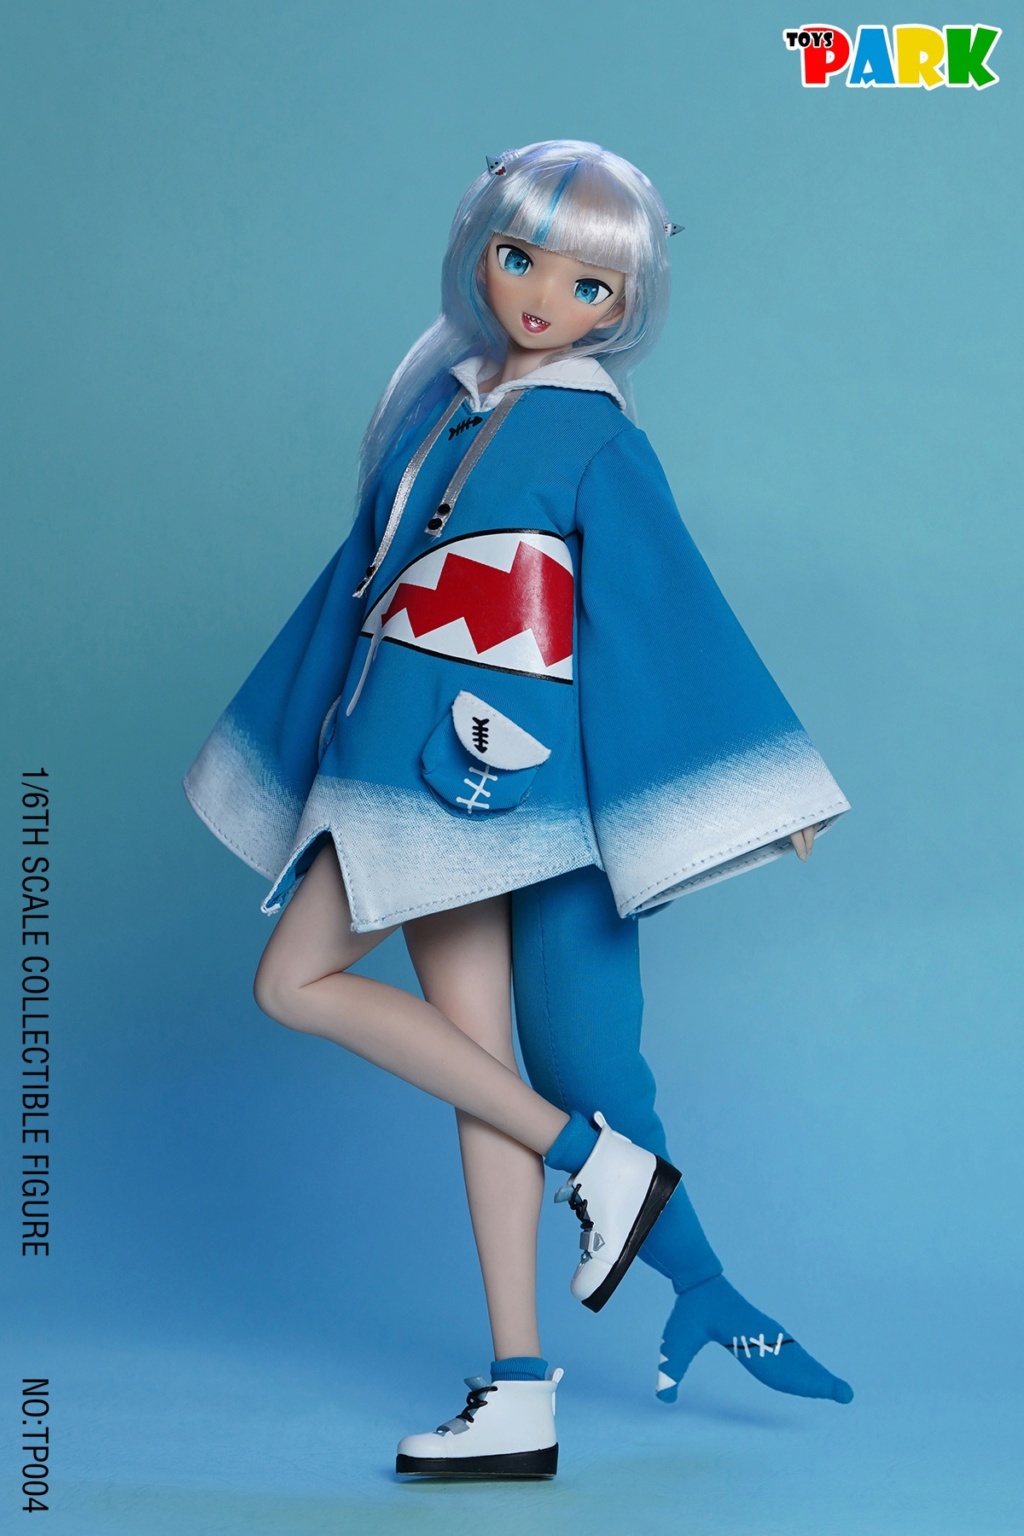 accessoryset - NEW PRODUCT: TOYS PARK: 1/6 Shark Girl Accessories Set #TP004 7e1a9510